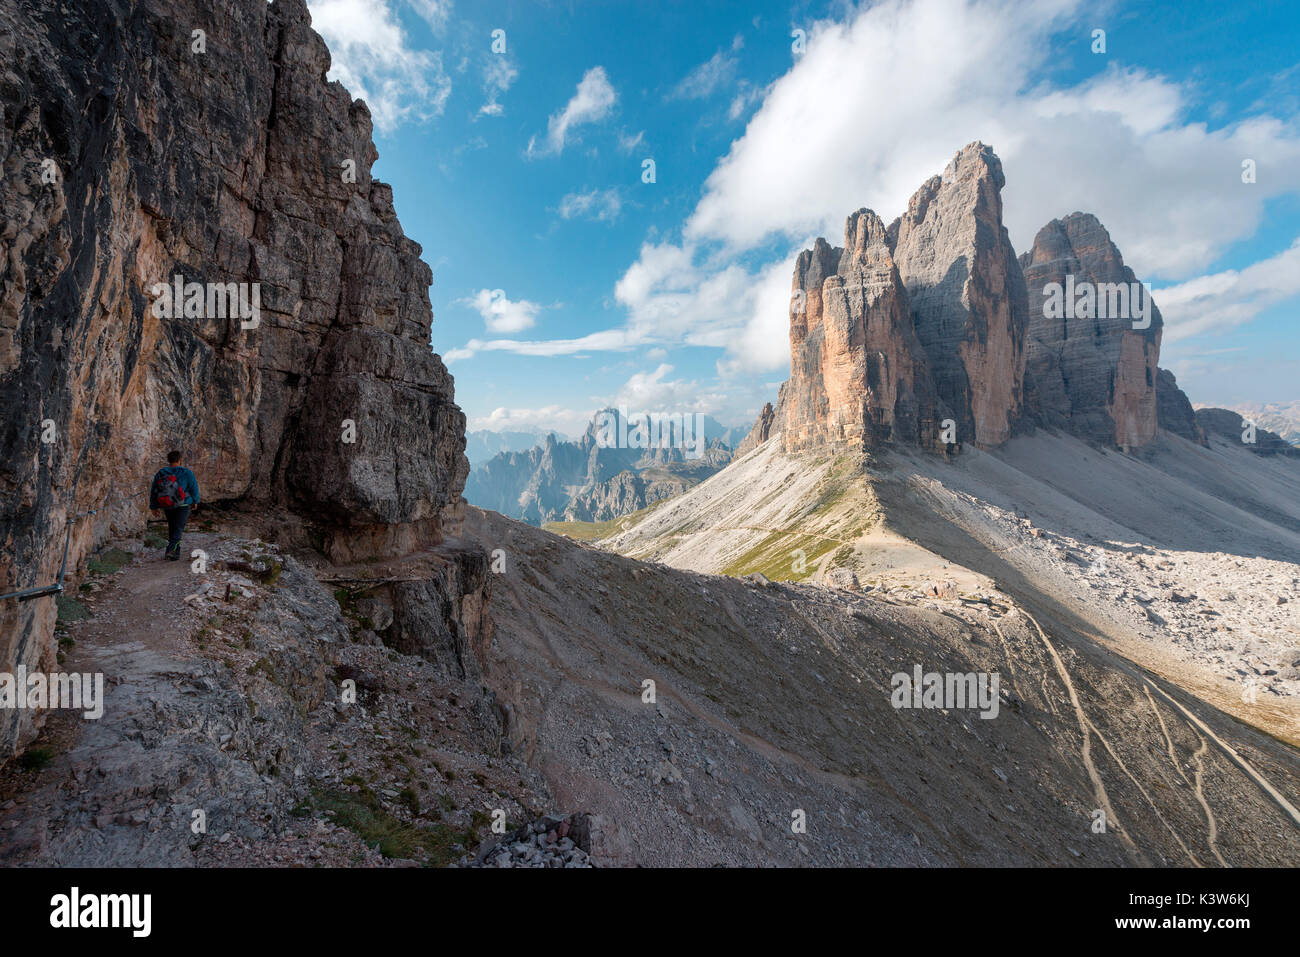 Europe, Italy, Dolomites, Veneto, Belluno. Hiker admire Tre Cime di Lavaredo from Trenches of the First World War on Mount Paterno Stock Photo